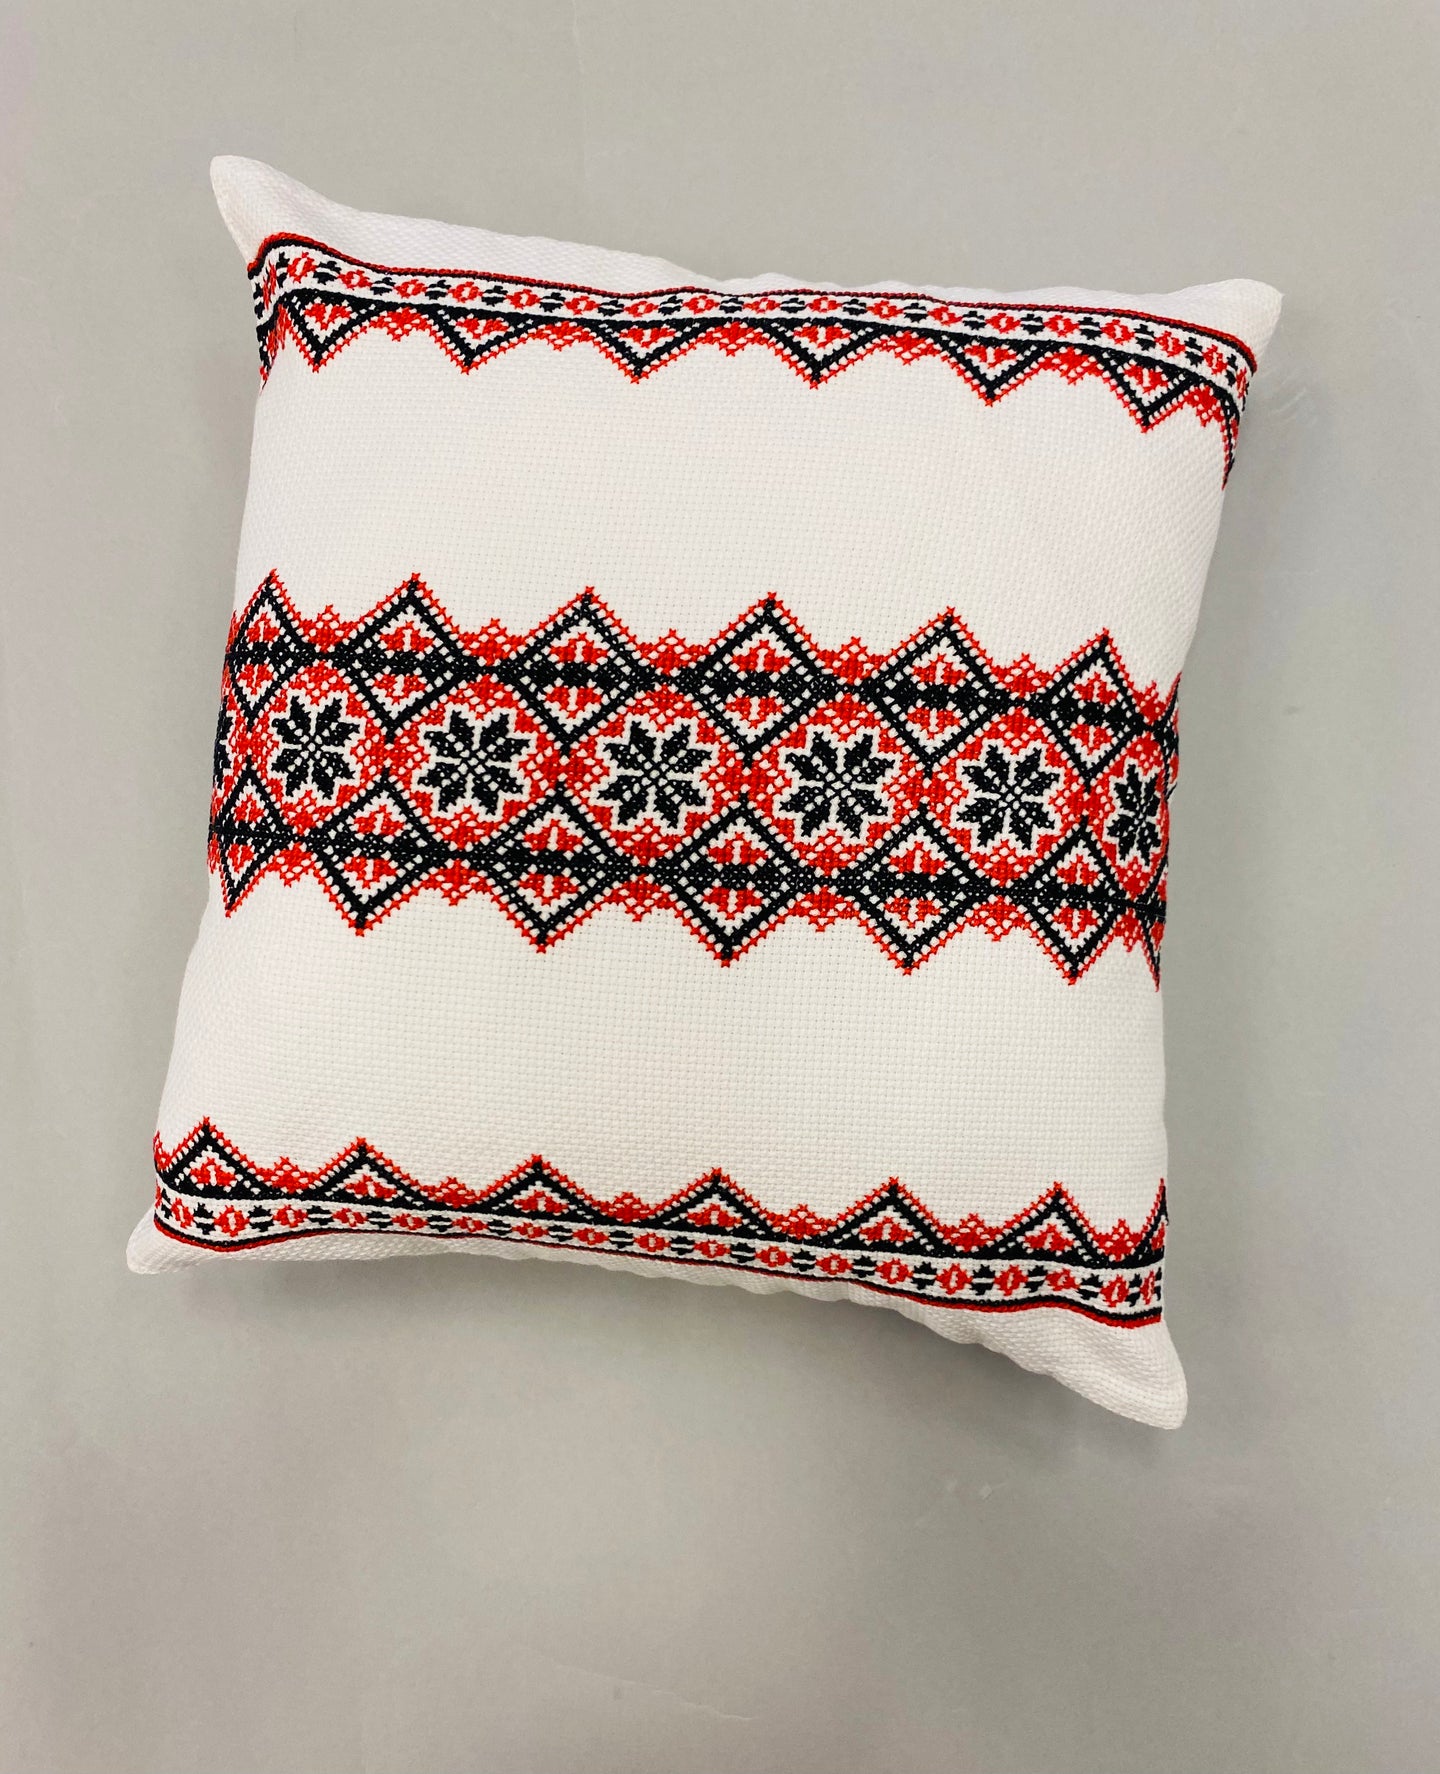 Embroidered pillow 14